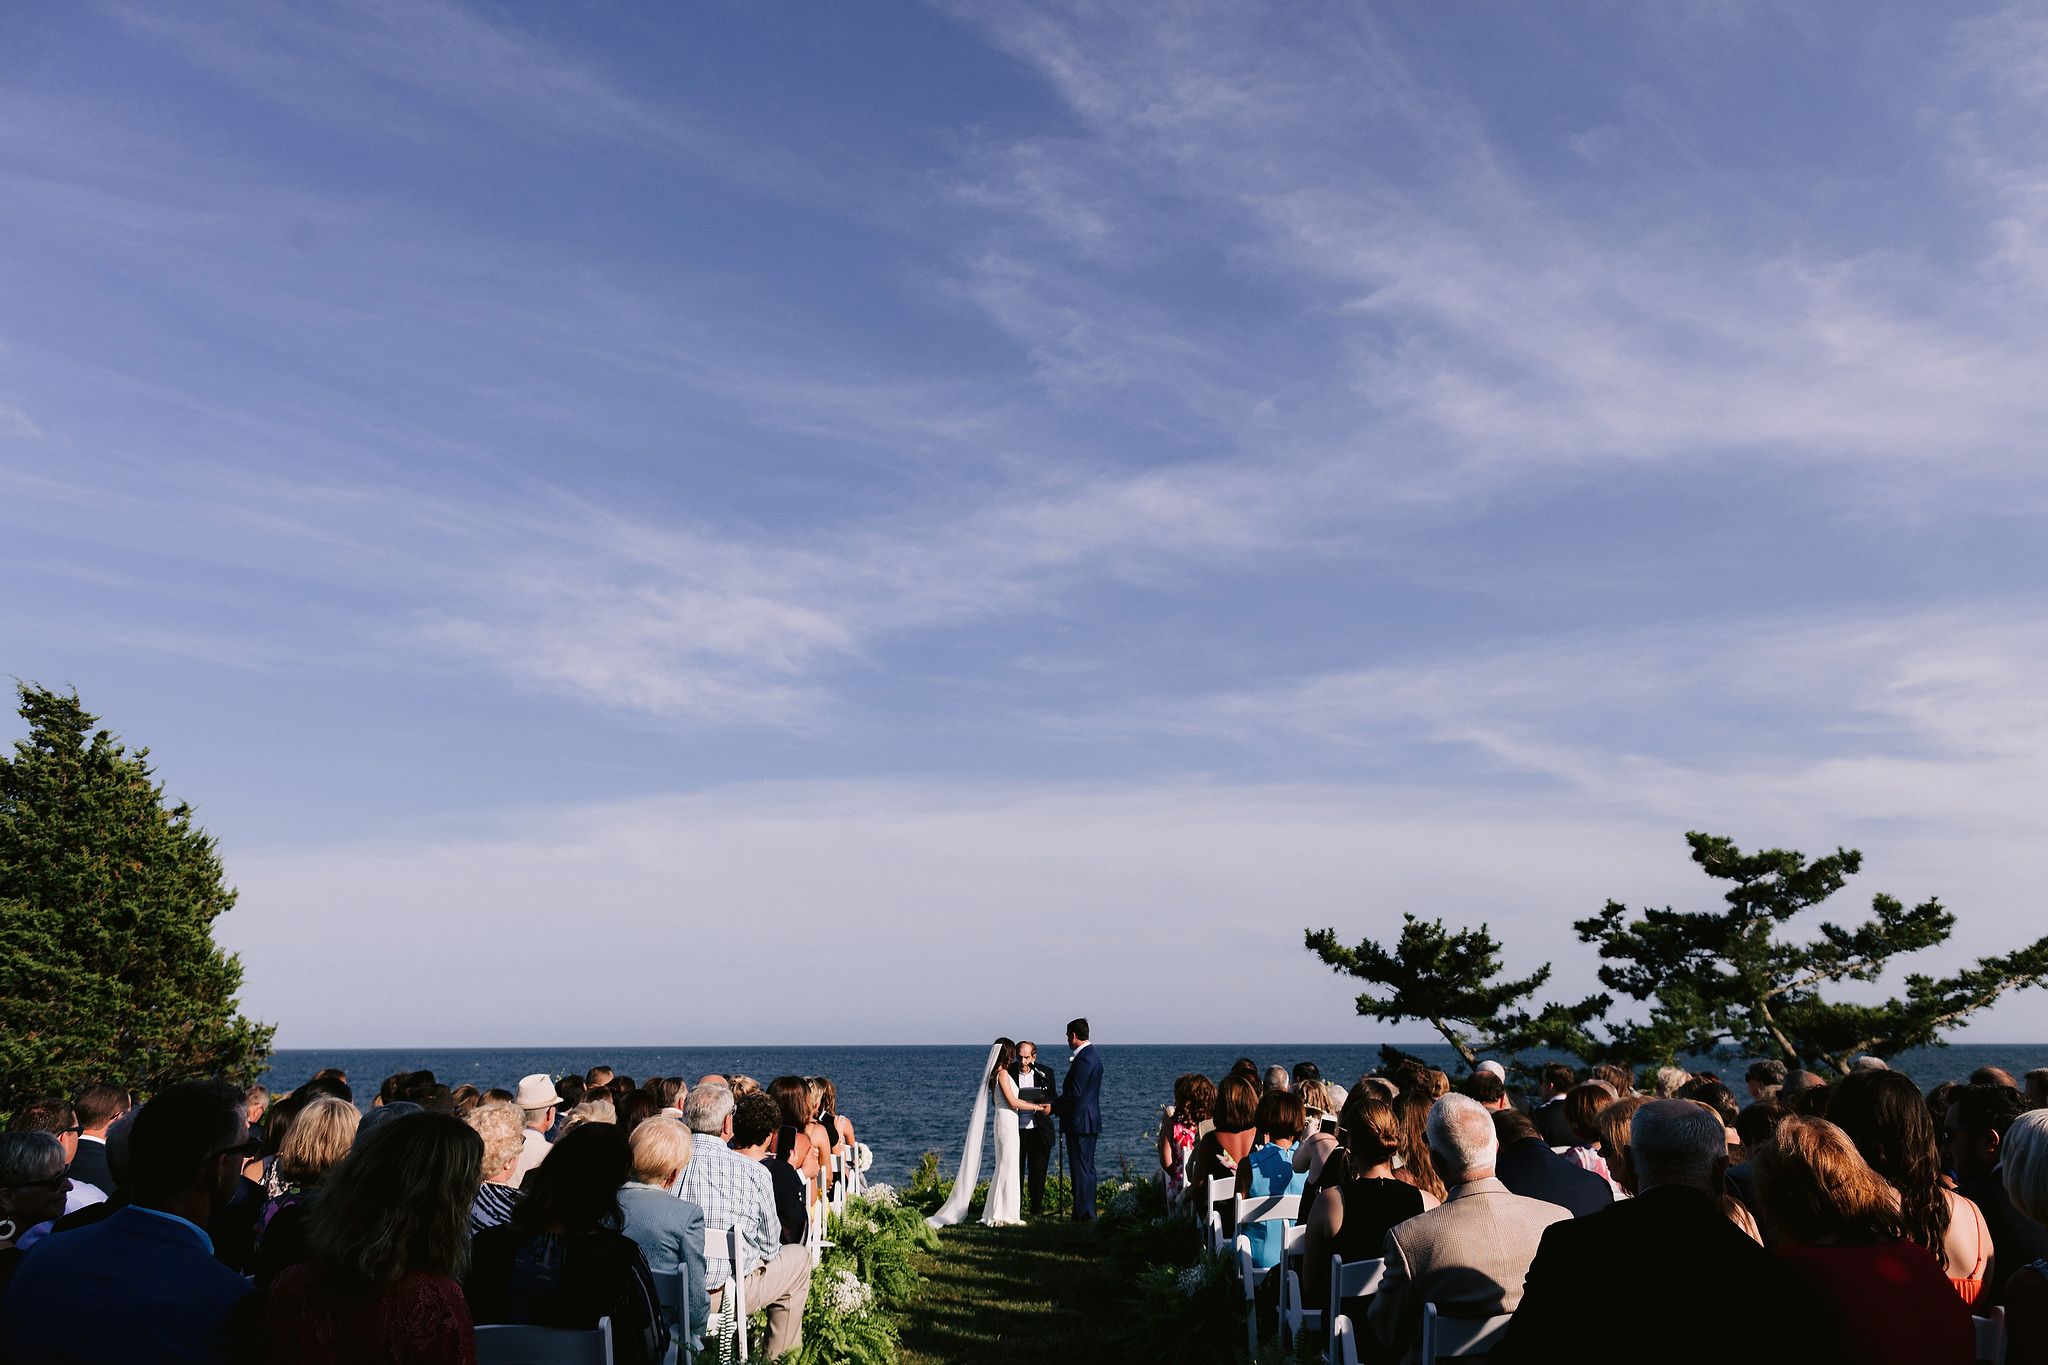 The bride and groom are saying their vows with the ocean in the background. Wianno Club, Cape Cod, Osterville, MA. Beach wedding venue image by Jenny Fu Studio